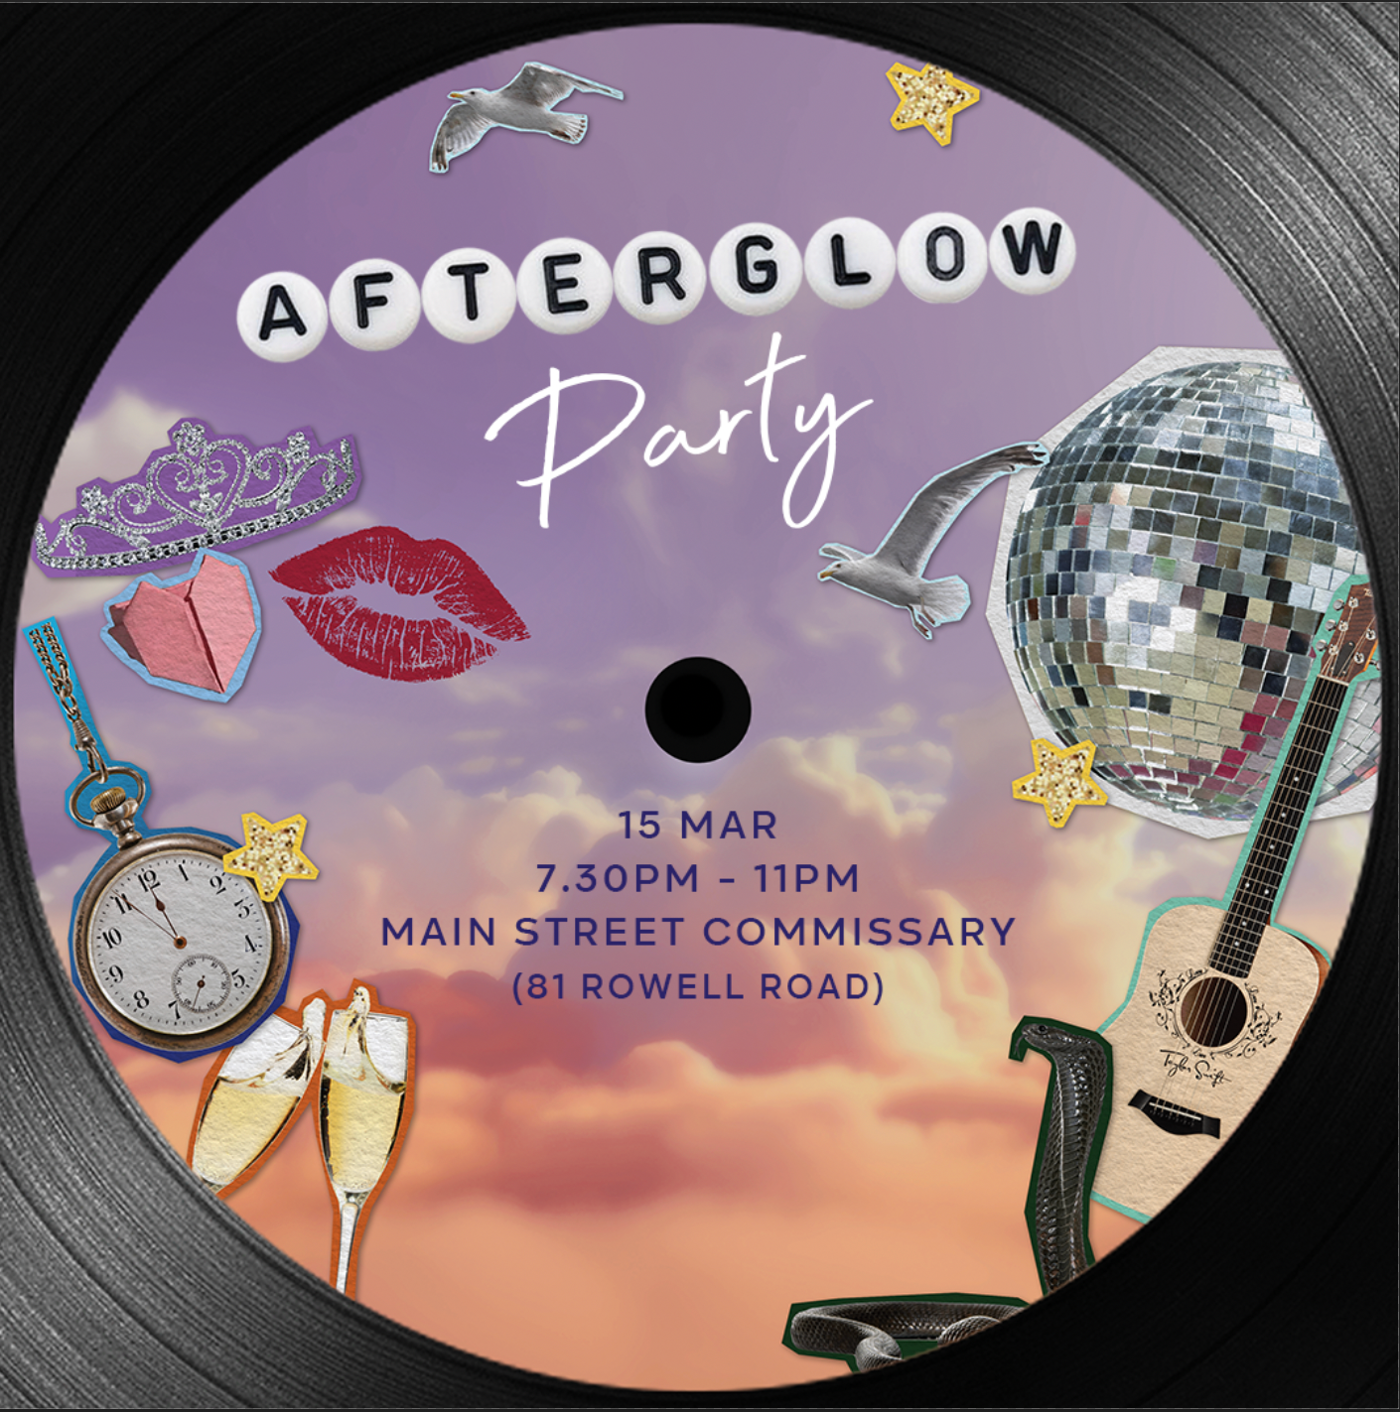 Taylor Swift events - afterglow party